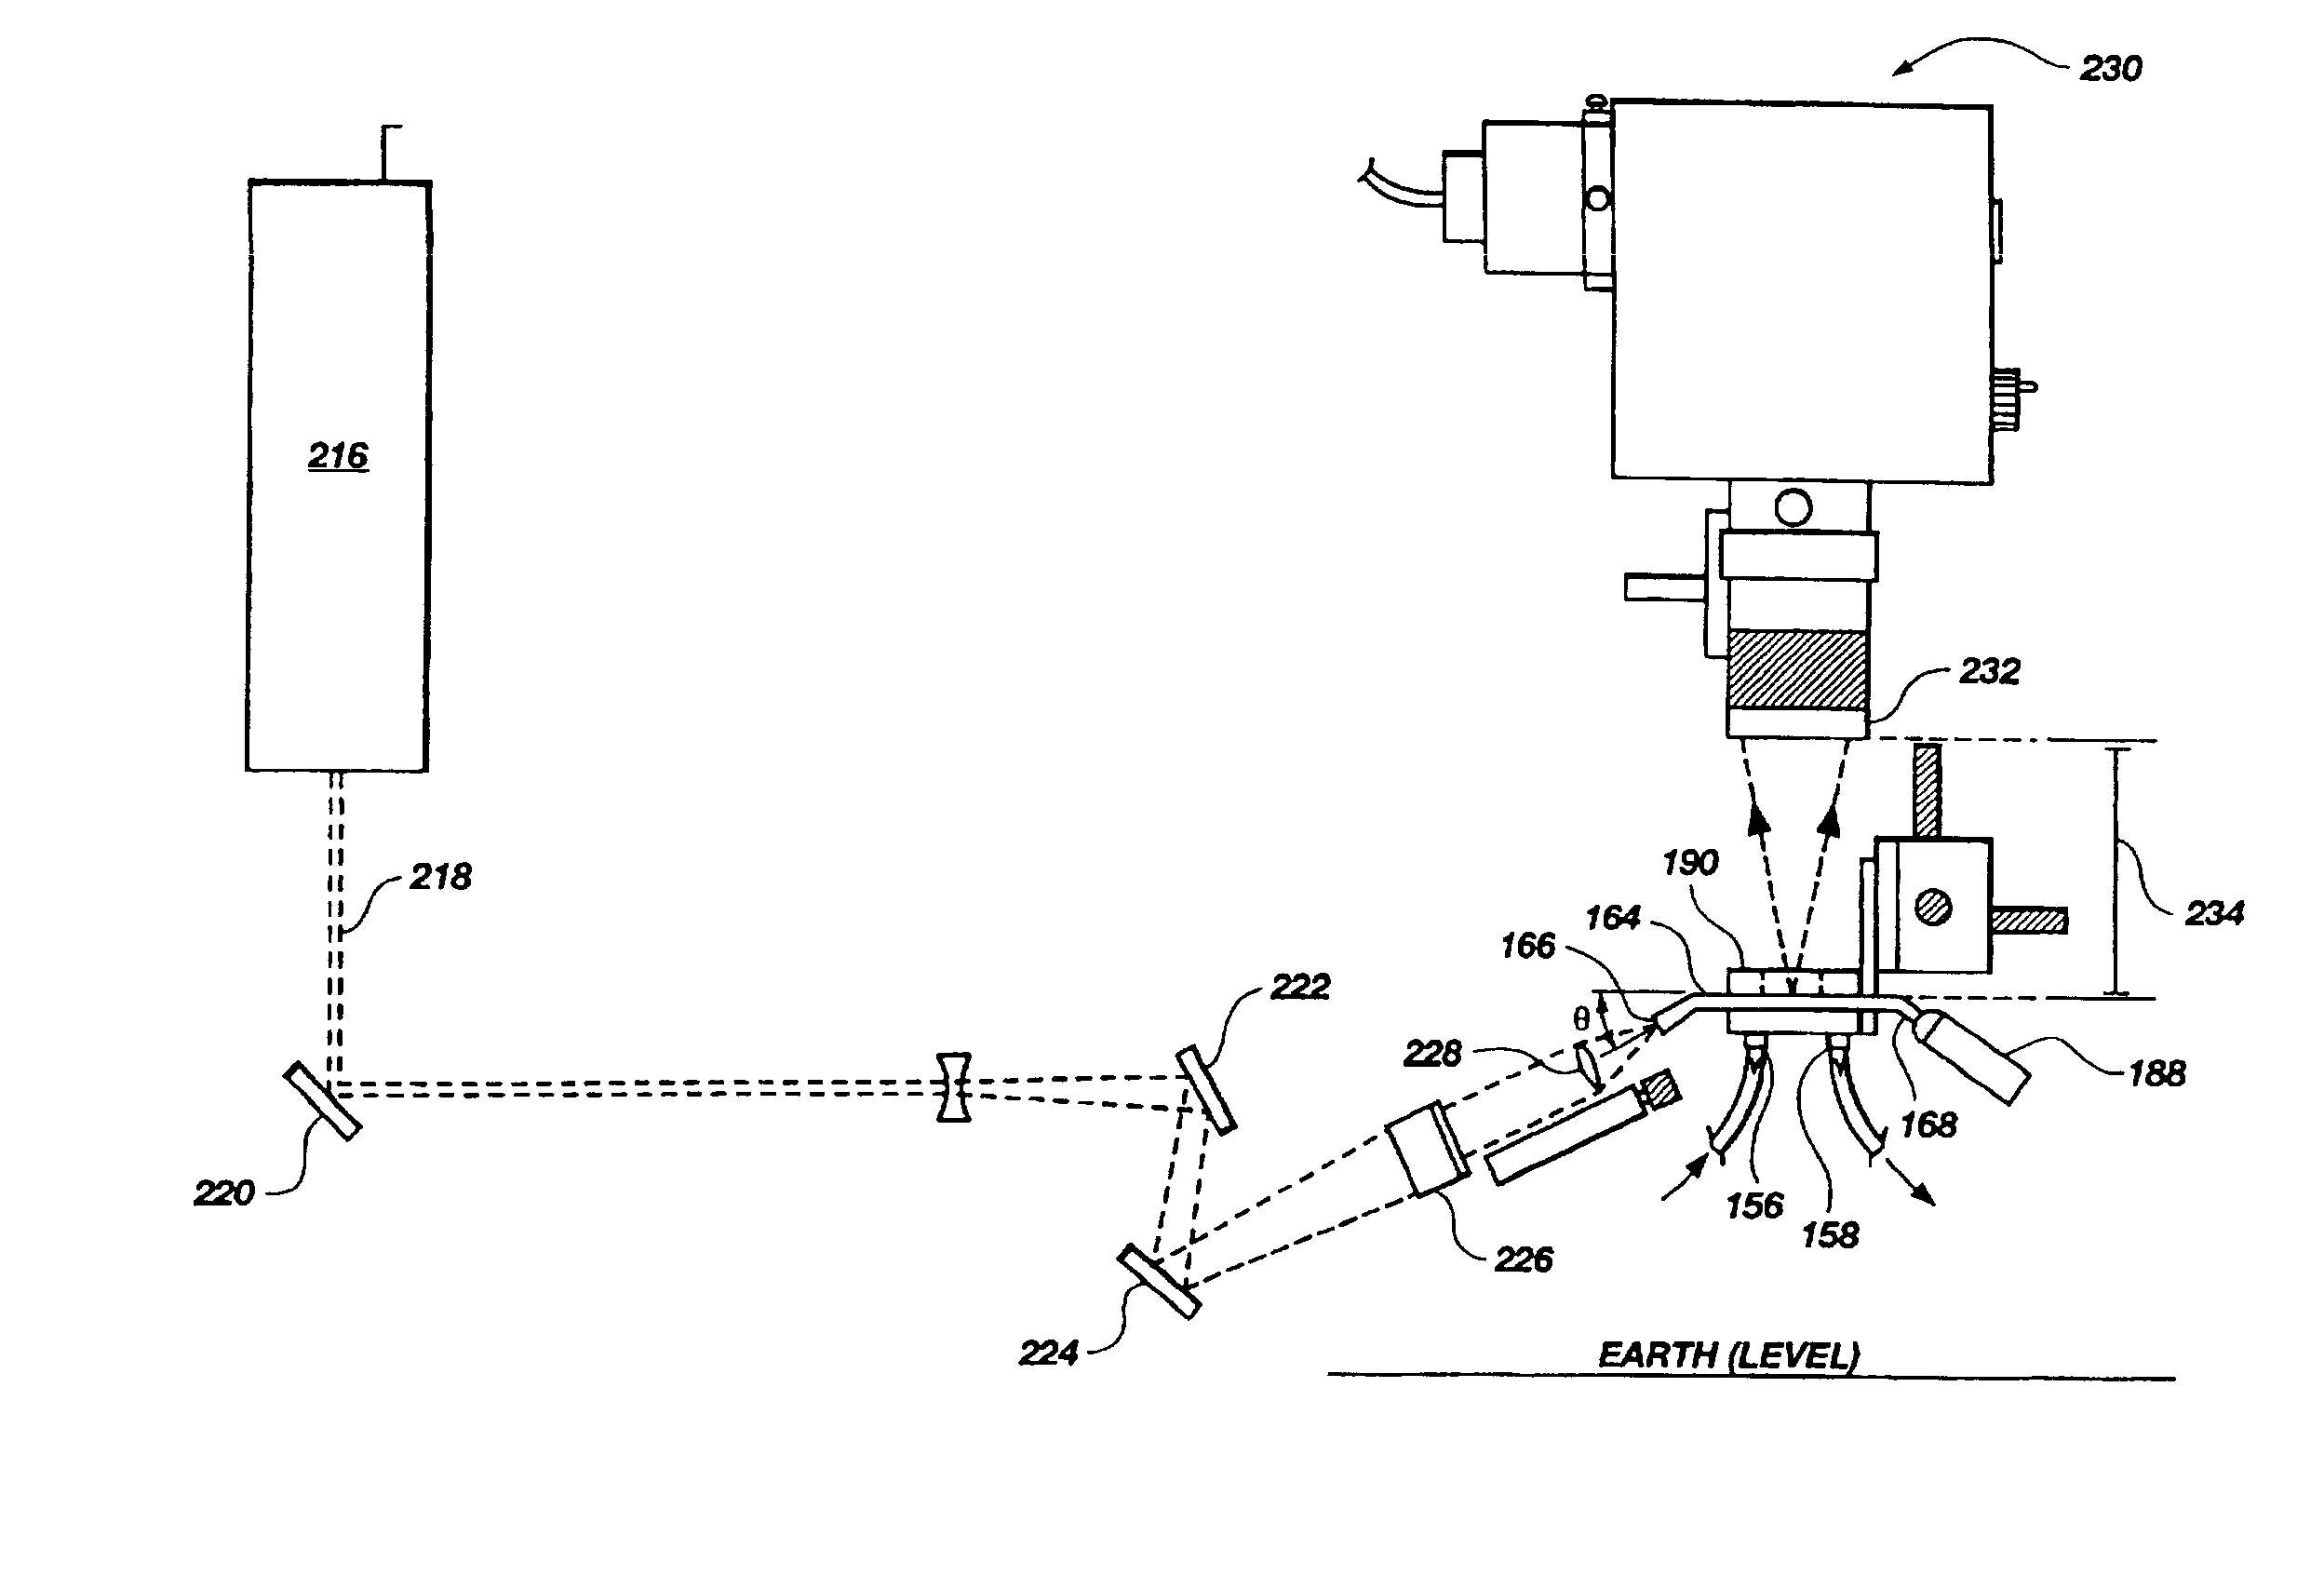 Lens and associatable flow cell